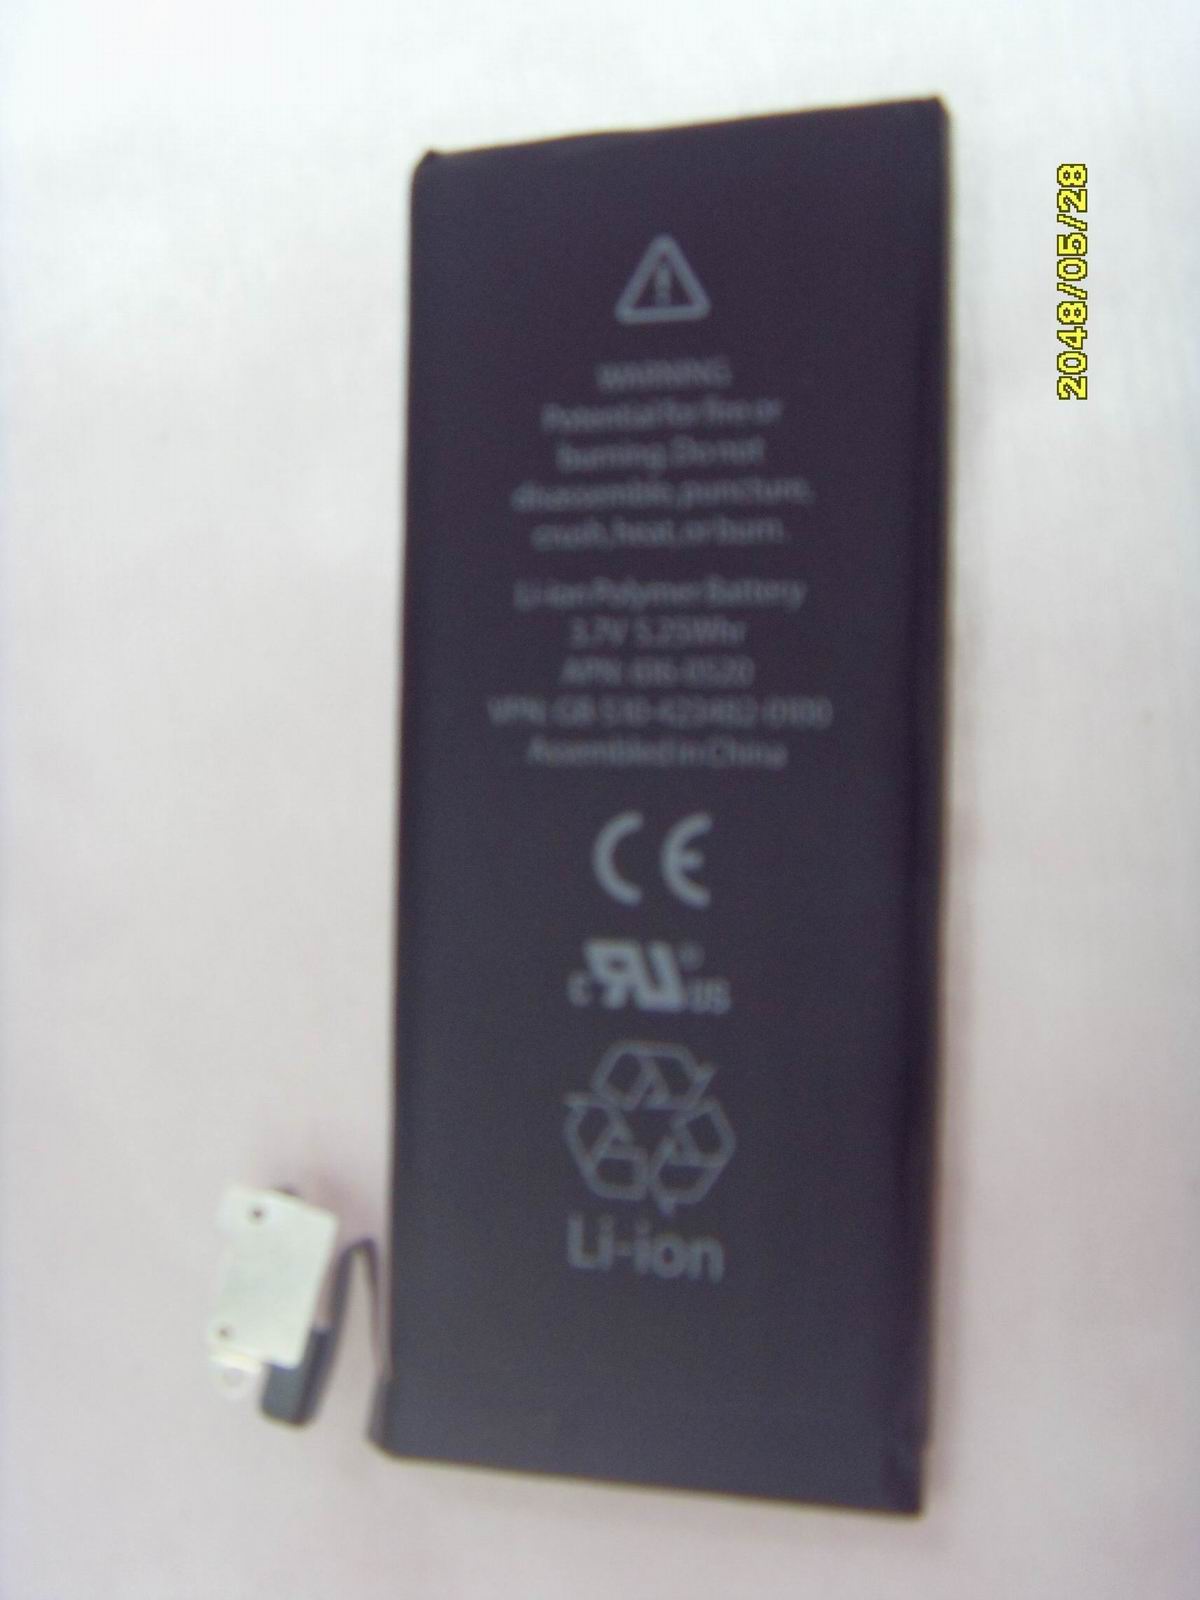 iPhone 4G battery